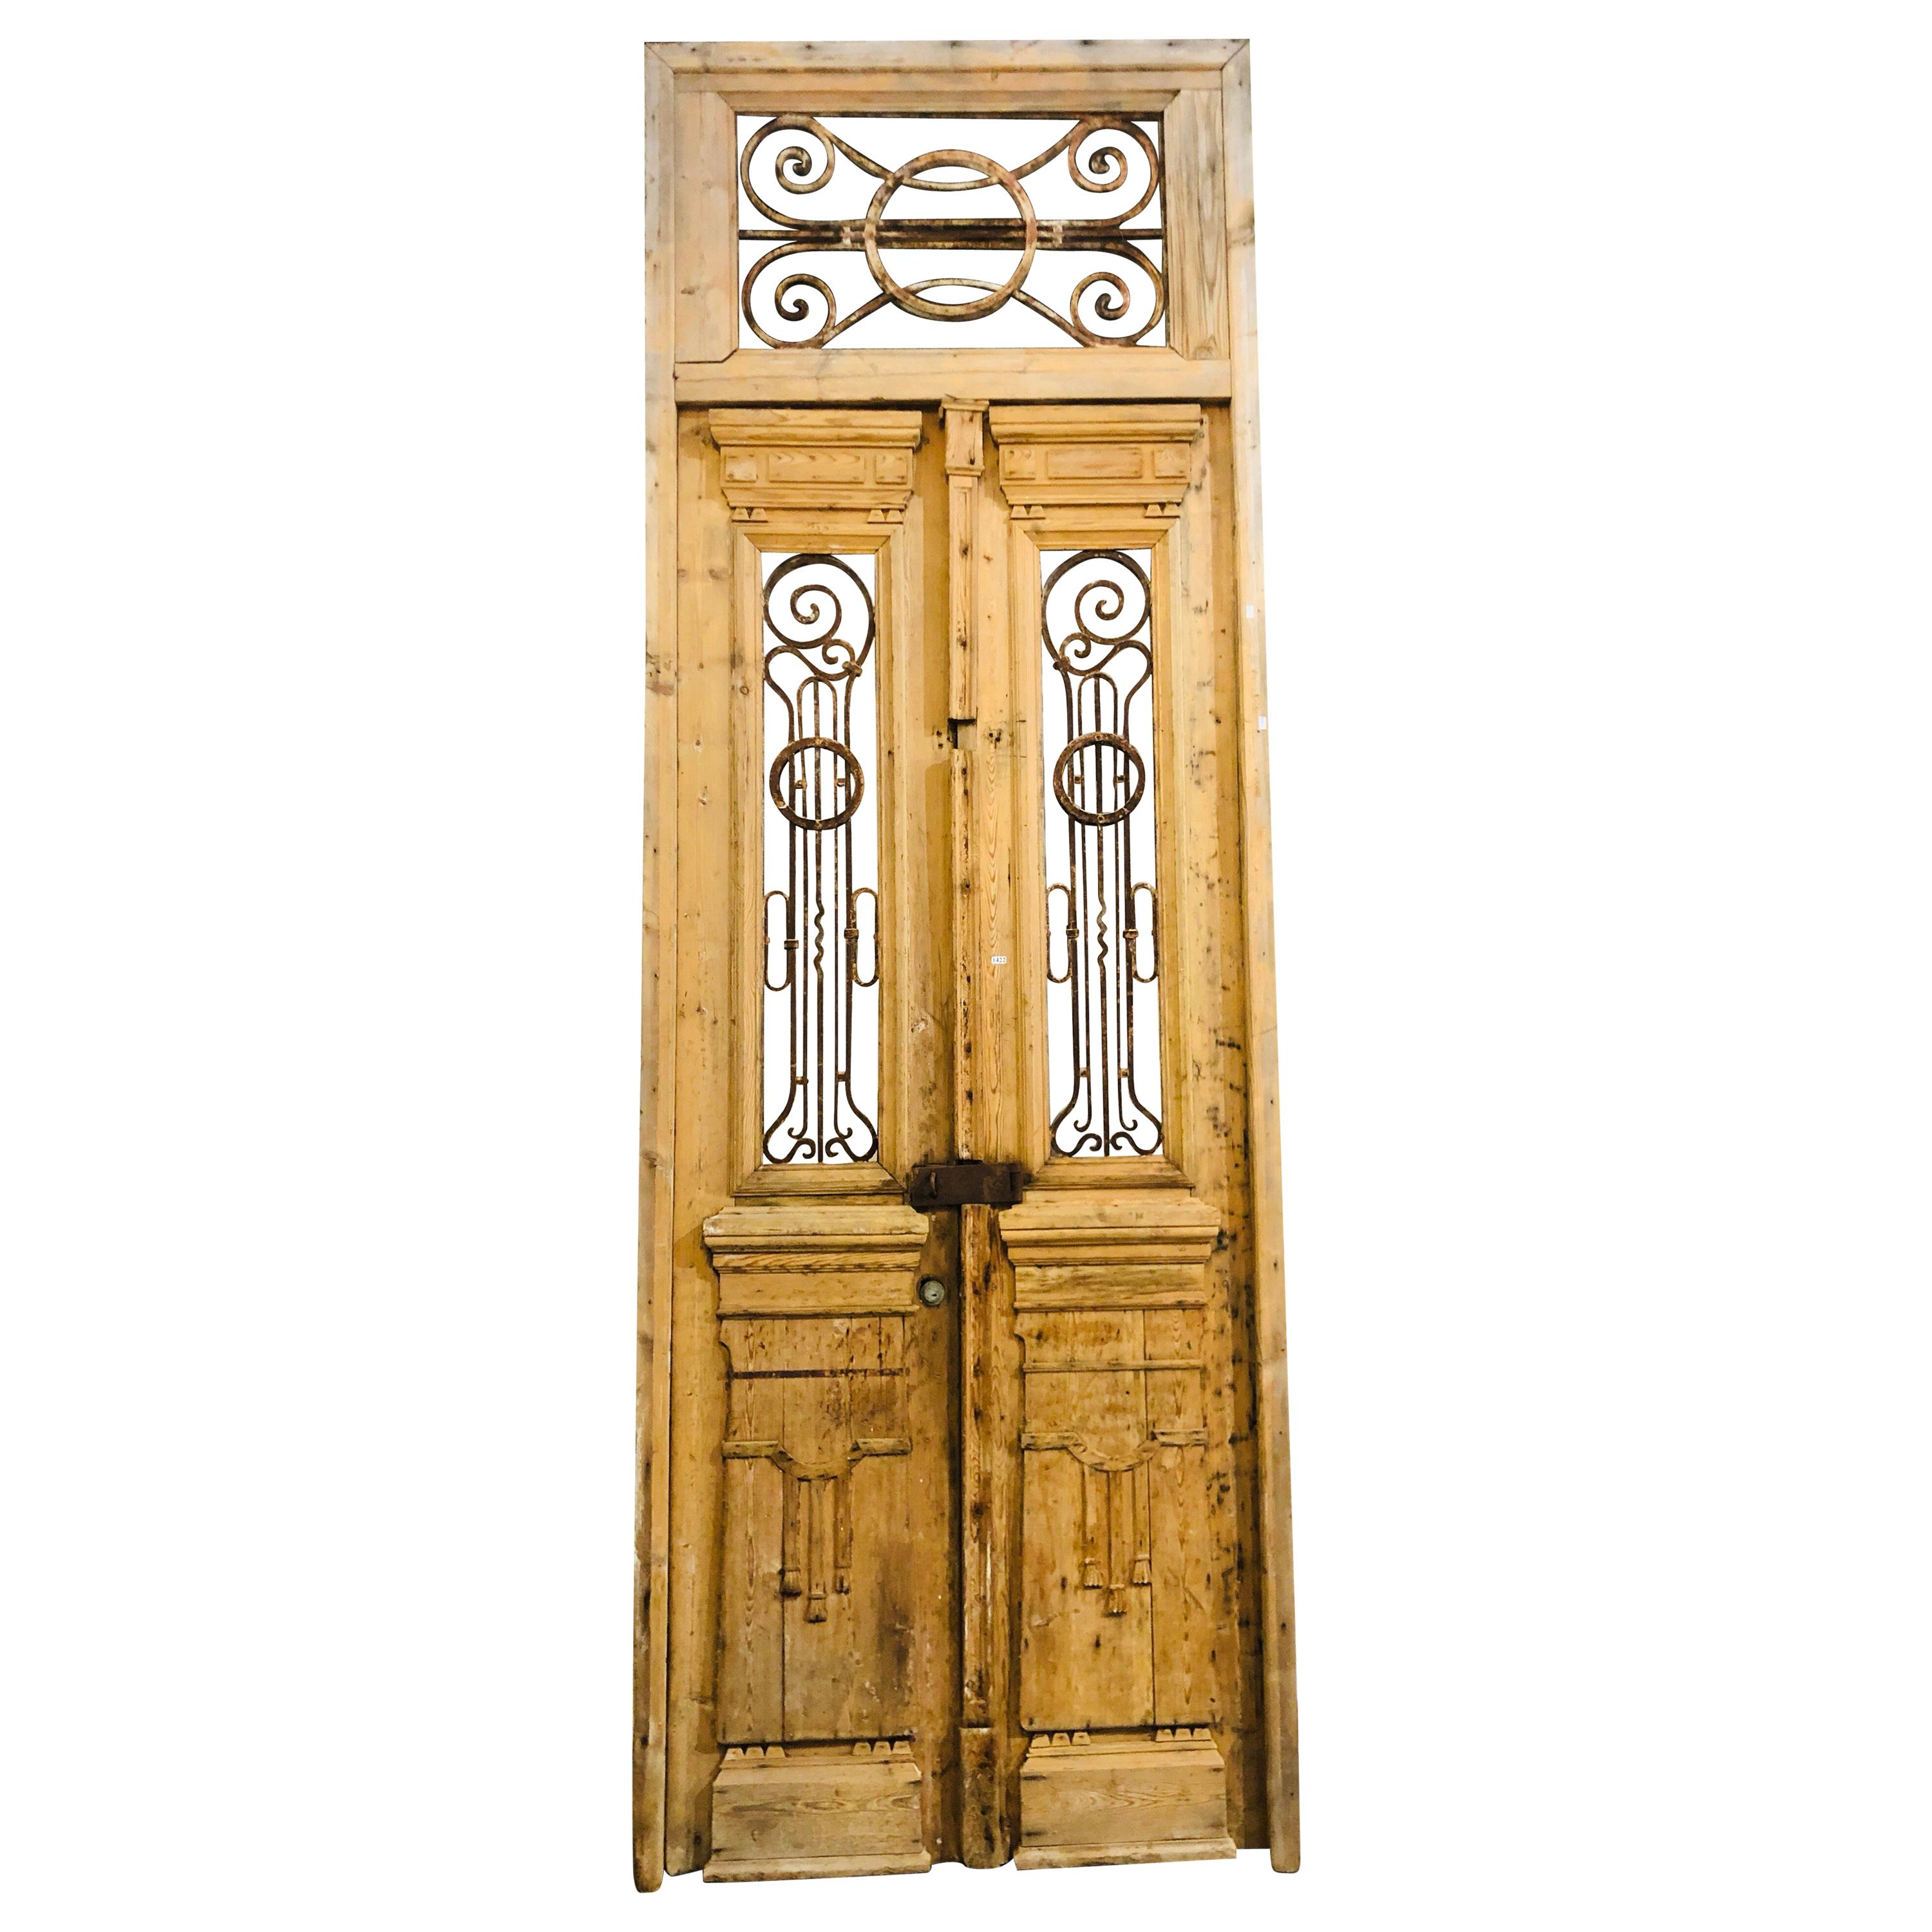 Architectural Antique French Farmhouse Barn Doors For Sale